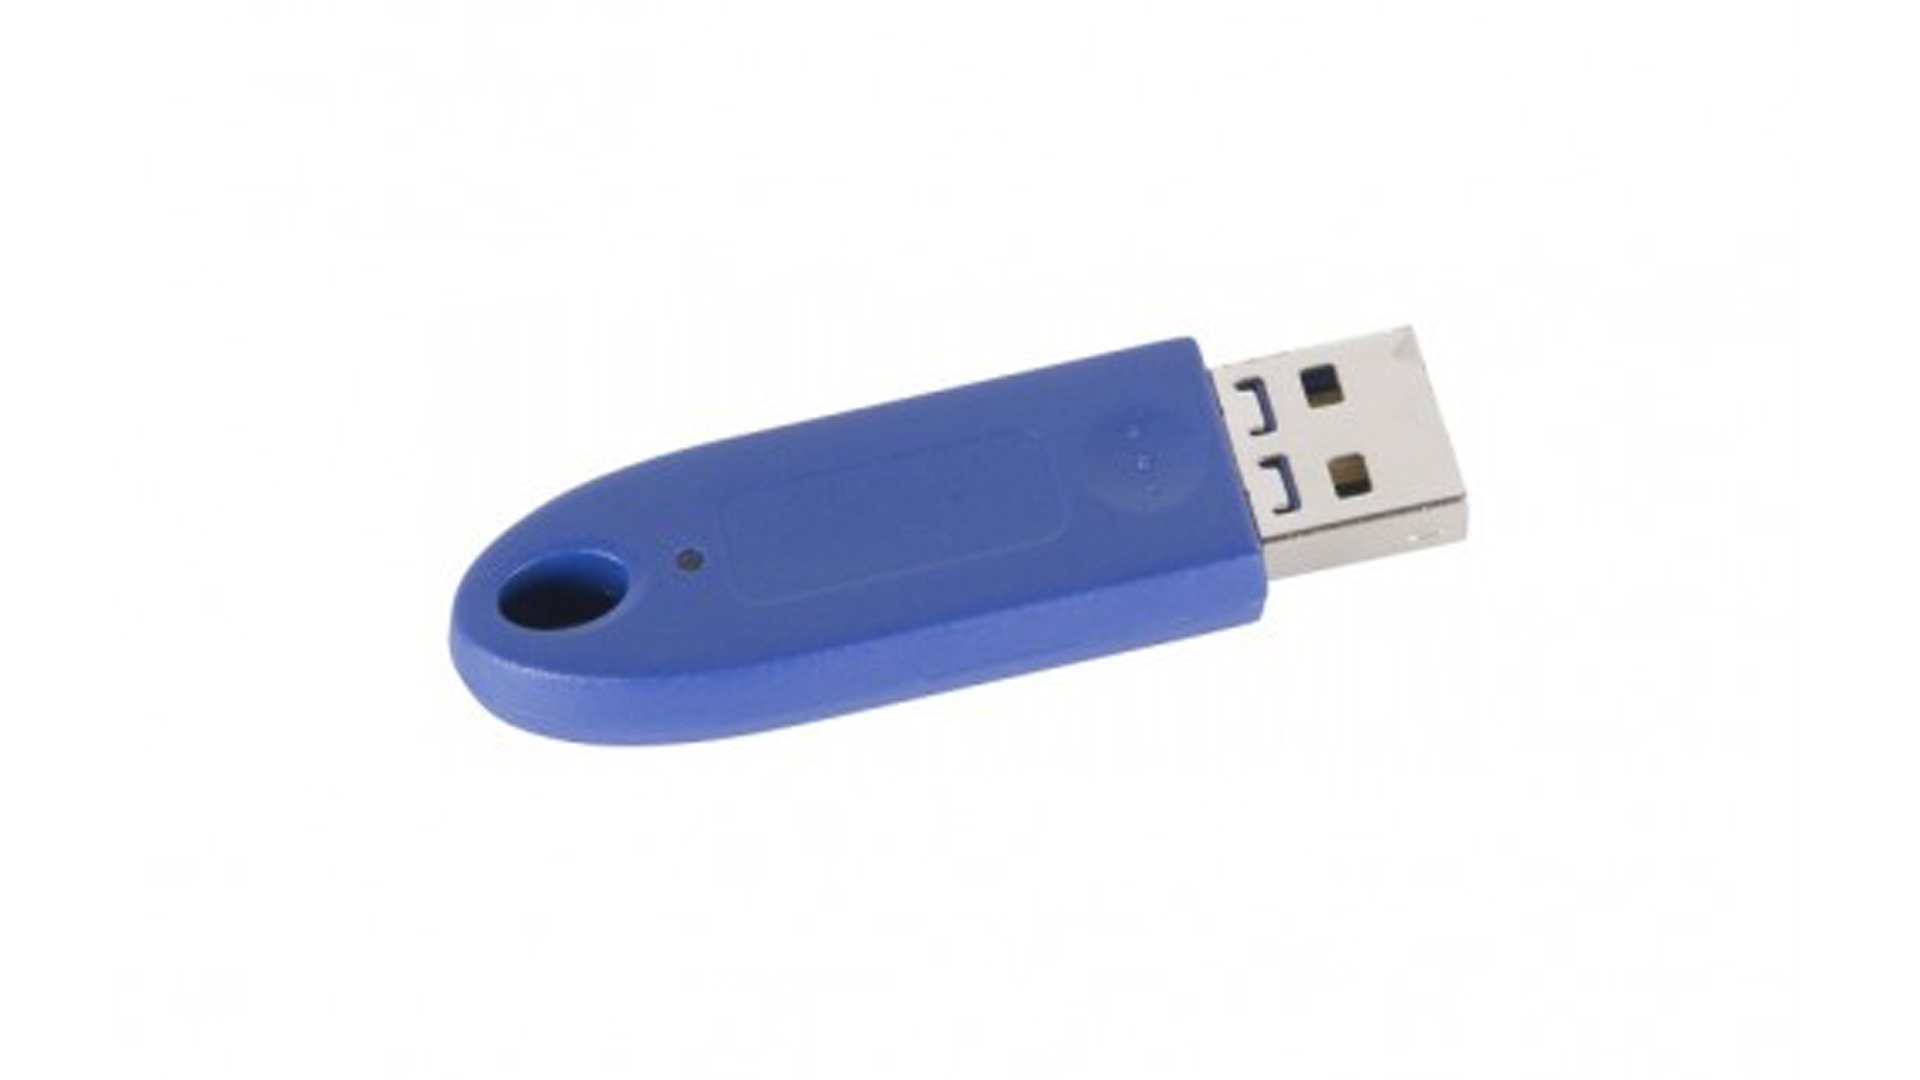 Hire Chamsys MagicQ MagicHD USB license dongle in Cardiff, Newport, Swansea, Carmarthenshire, Pembrokeshire & South West Wales